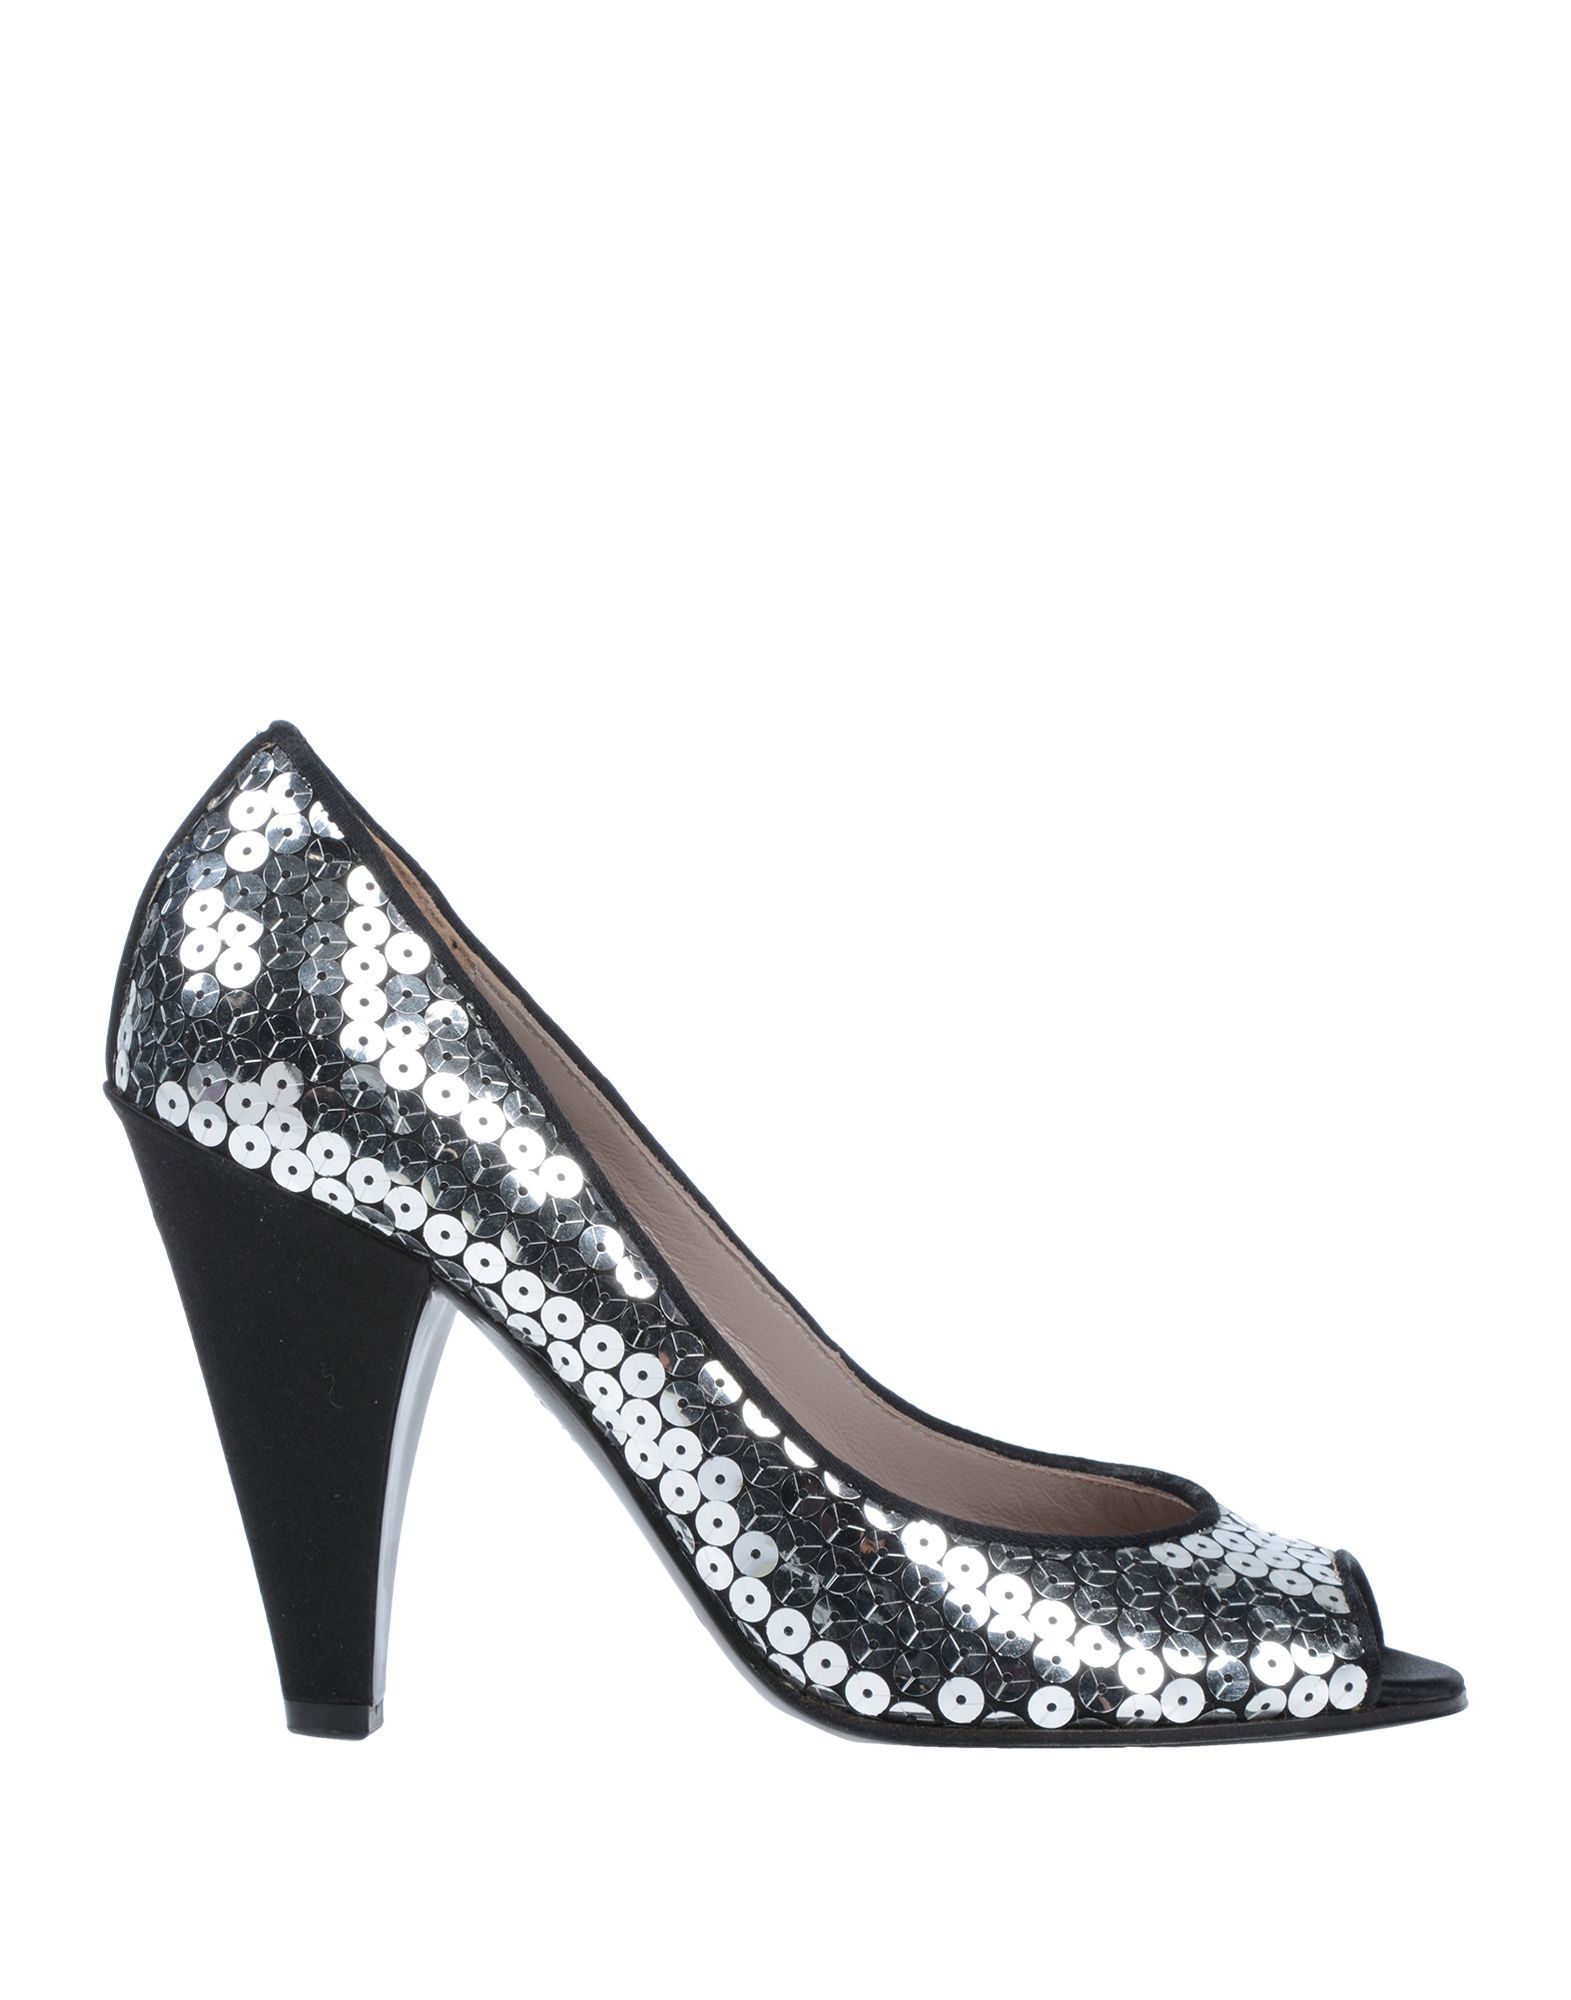 sequins, solid colour, open toe, spike heel, covered heel, leather lining, leather sole, contains non-textile parts of animal origin